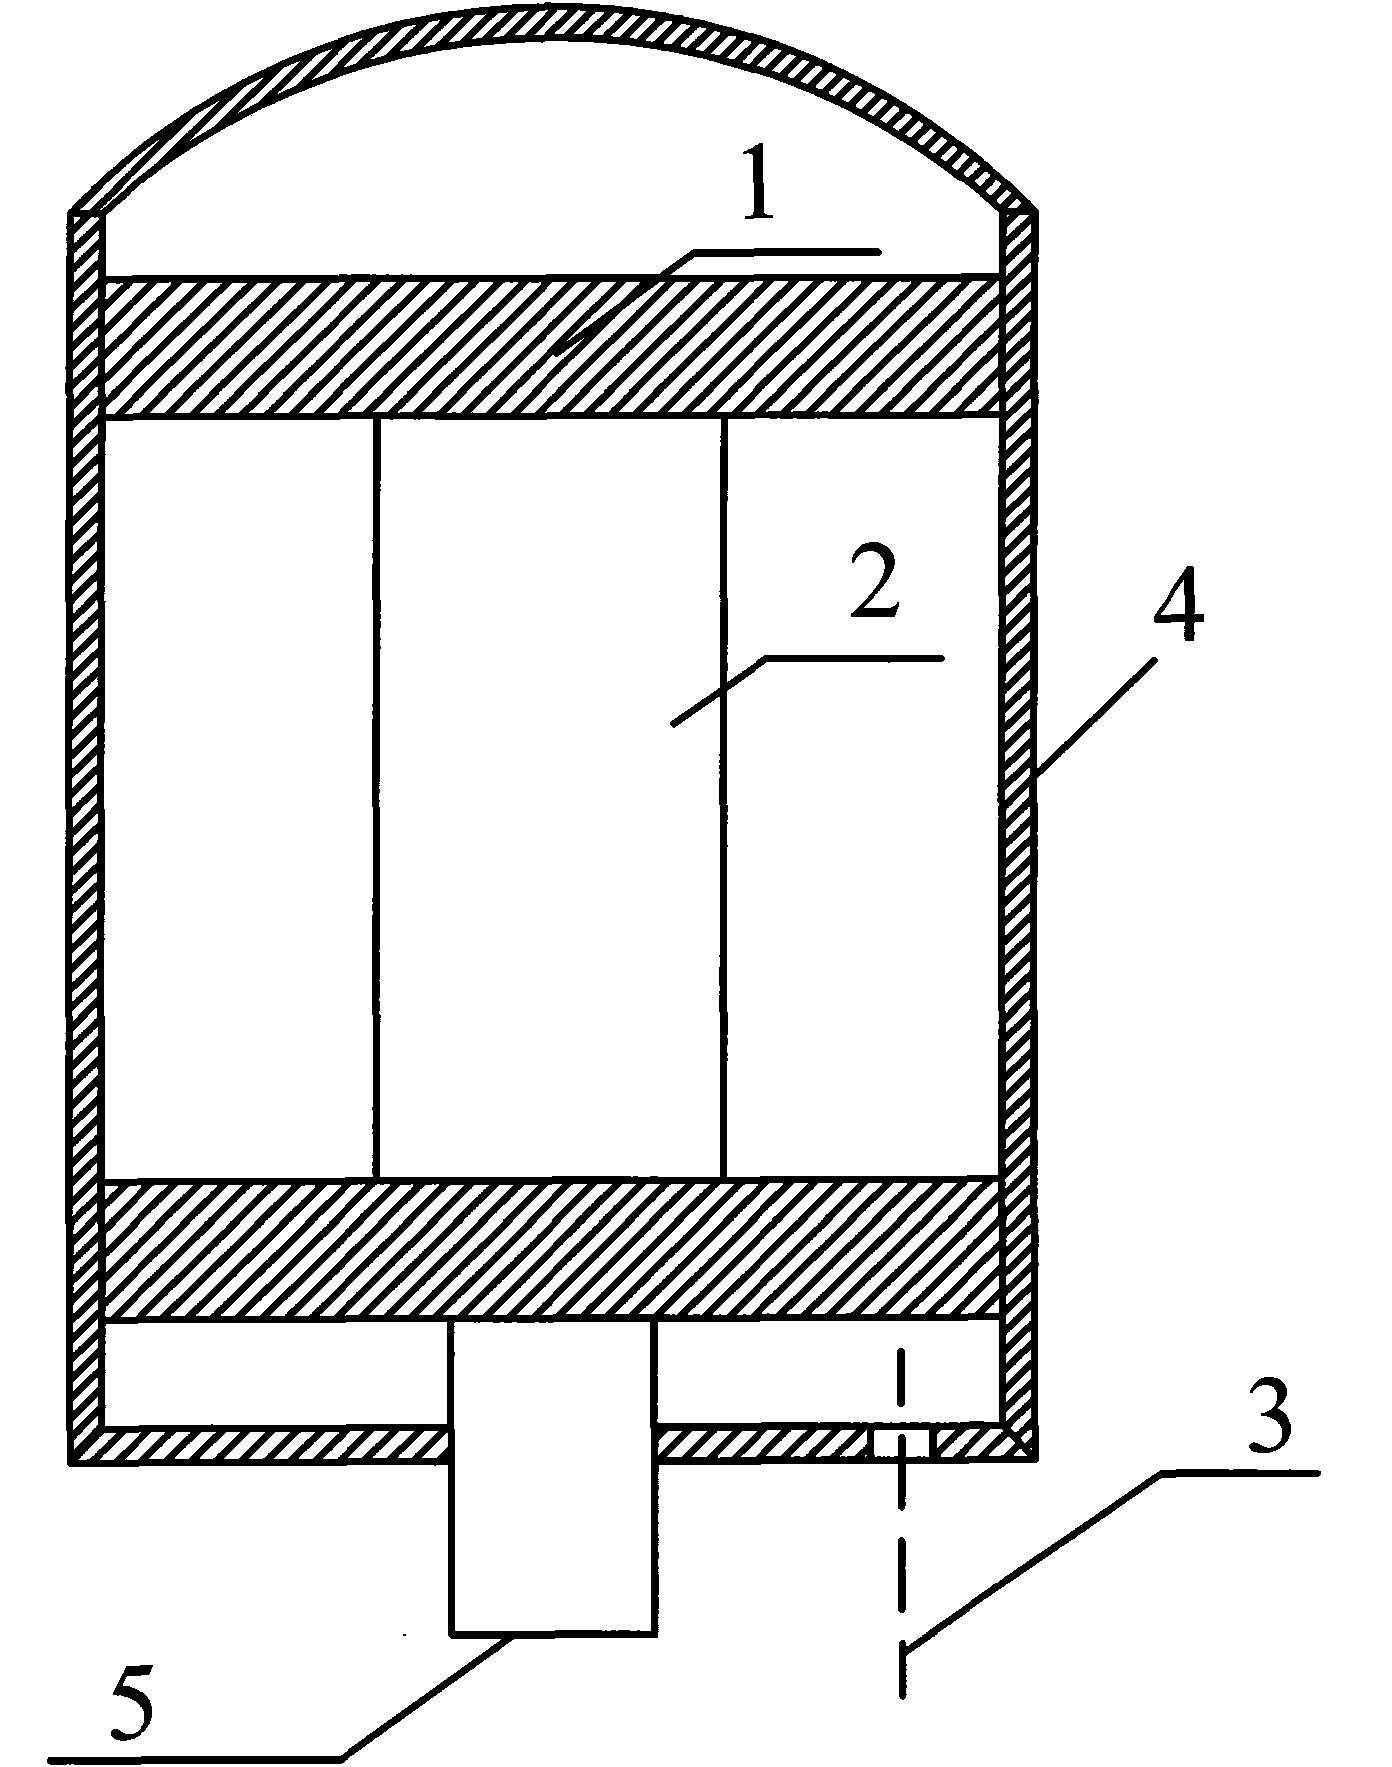 Device for monitoring pressure